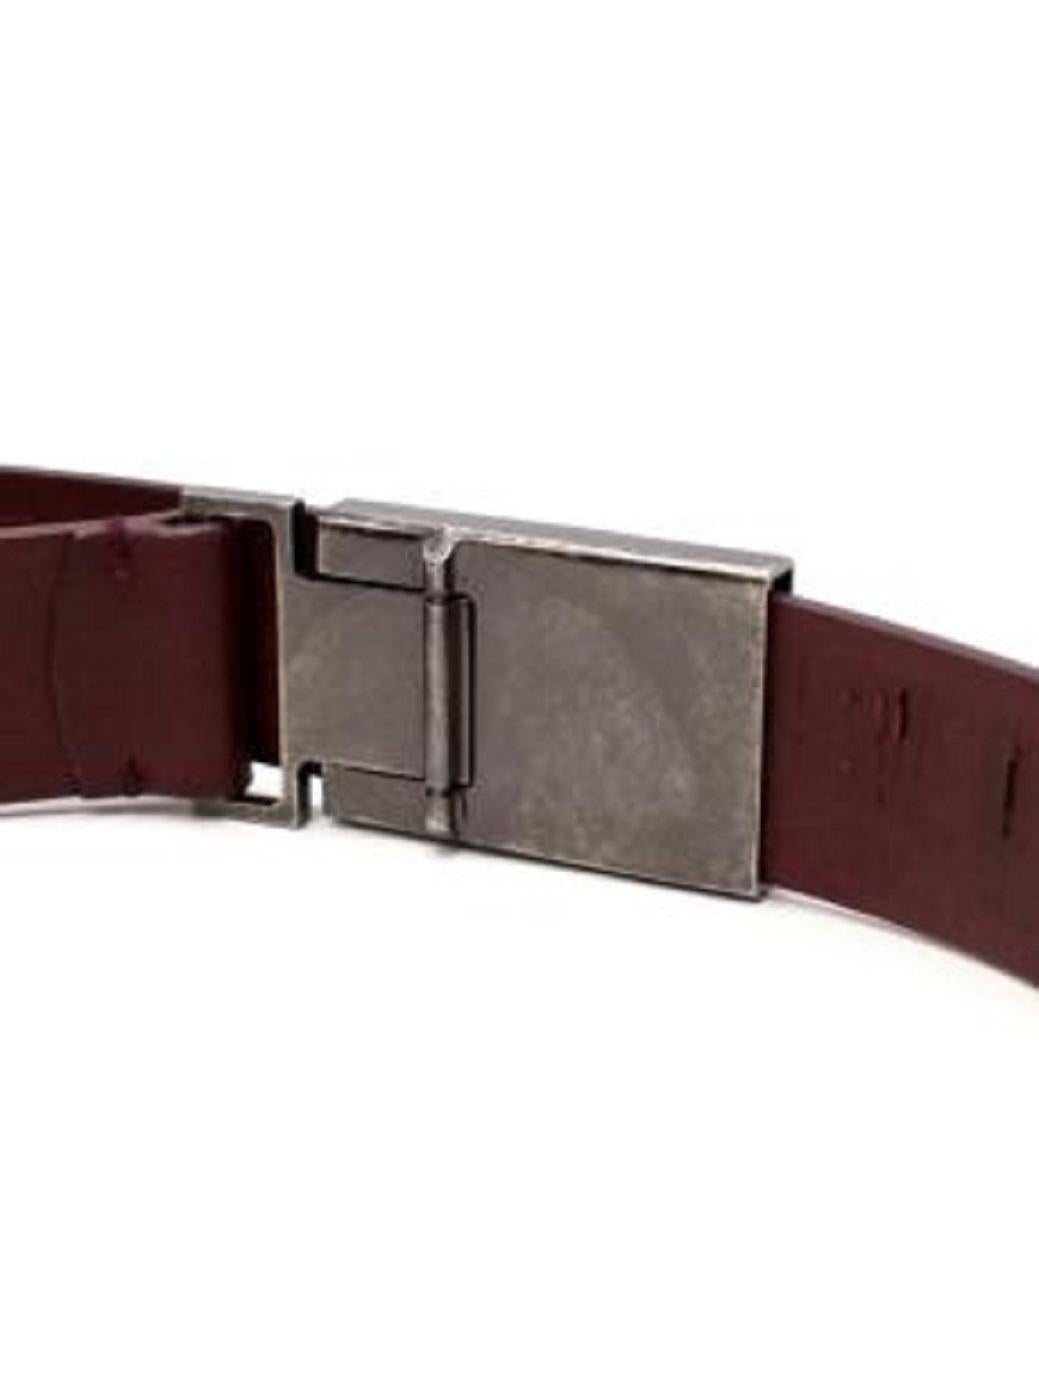 Maison Margiela Dark Plum Leather Belt with Burnished Buckle In Good Condition For Sale In London, GB